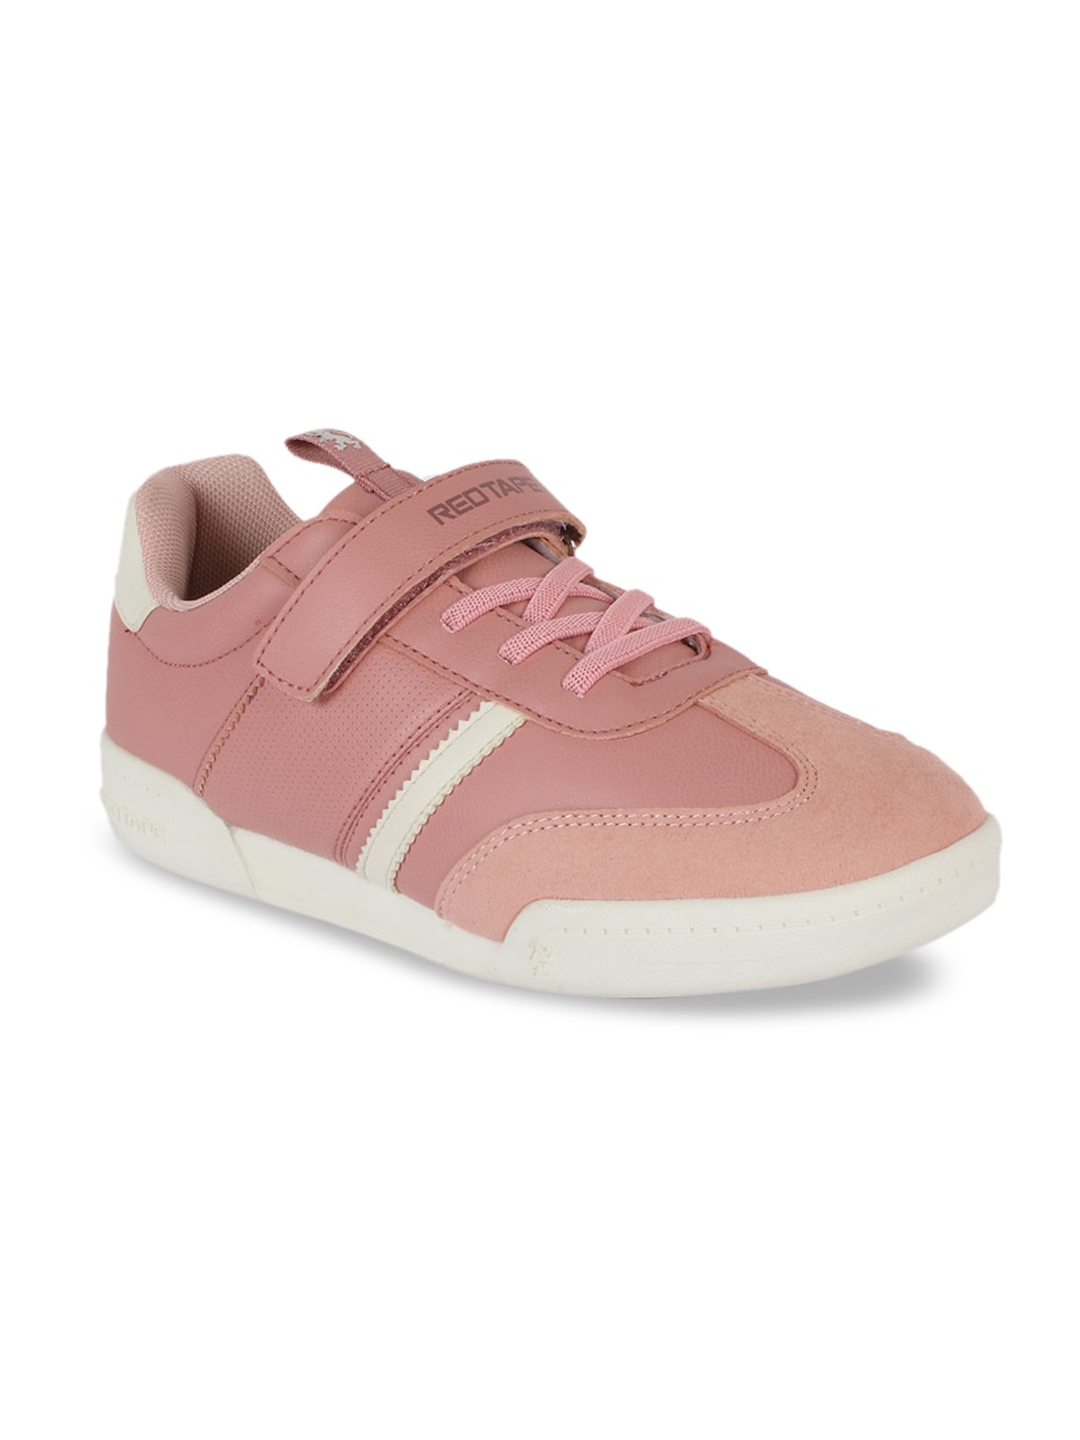 Buy Red Tape Unisex Kids Pink & Peach Coloured Colourblocked Sneakers ...